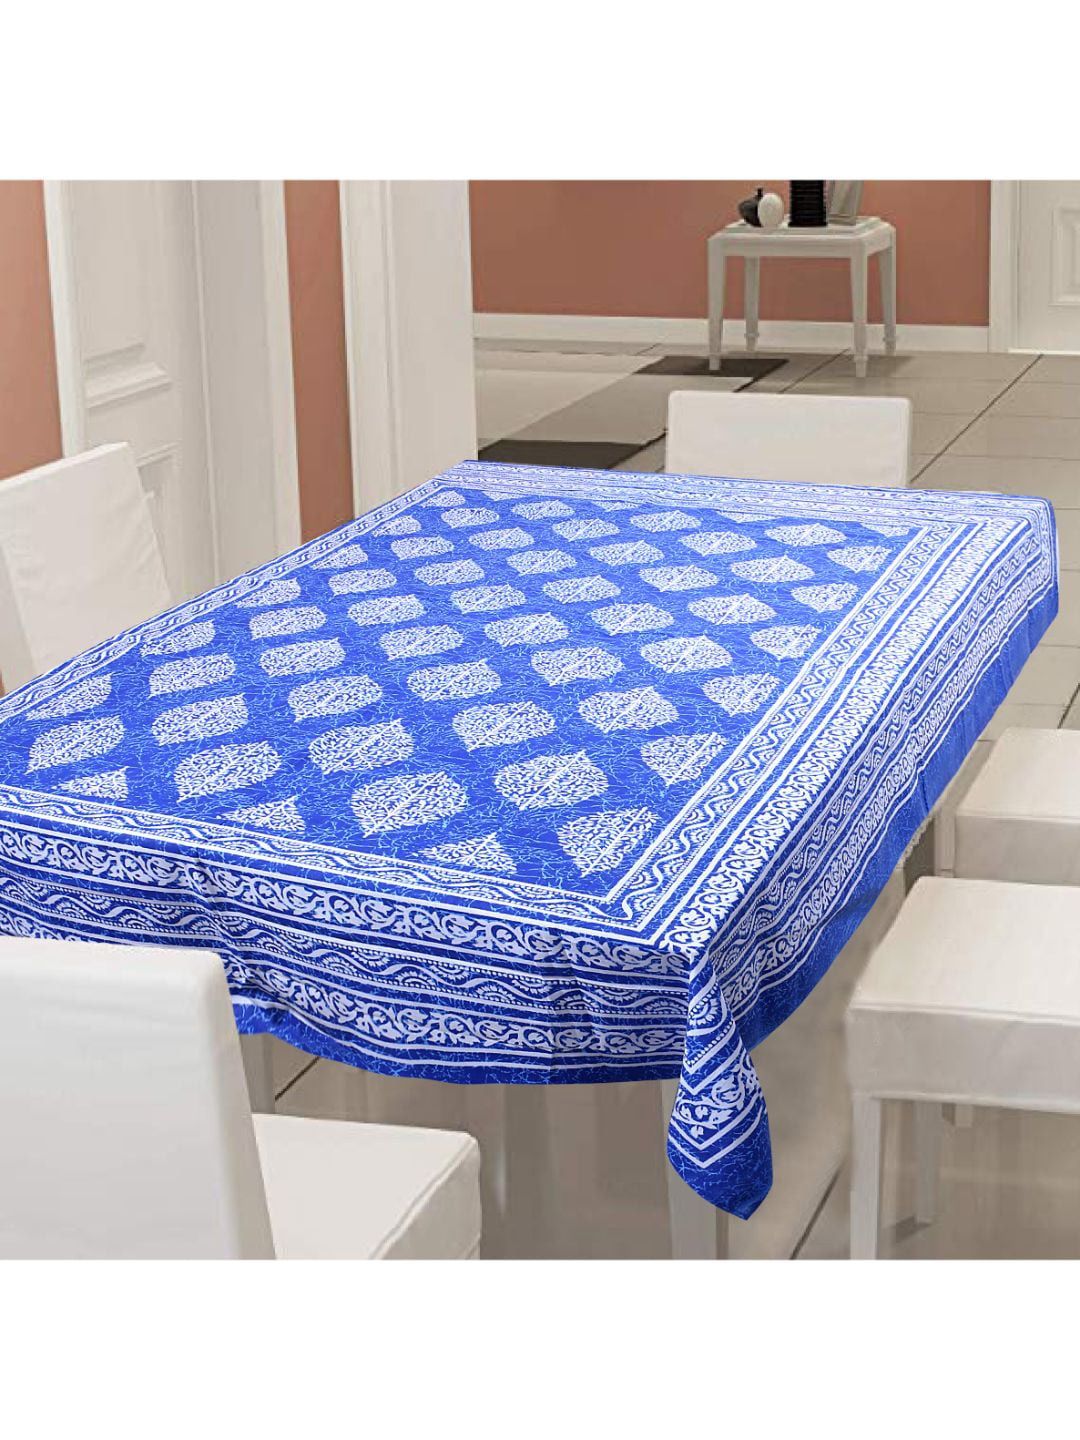 INDHOME LIFE Blue & White Floral Printed 6-Seater 144 TC Cotton Table Cover Price in India